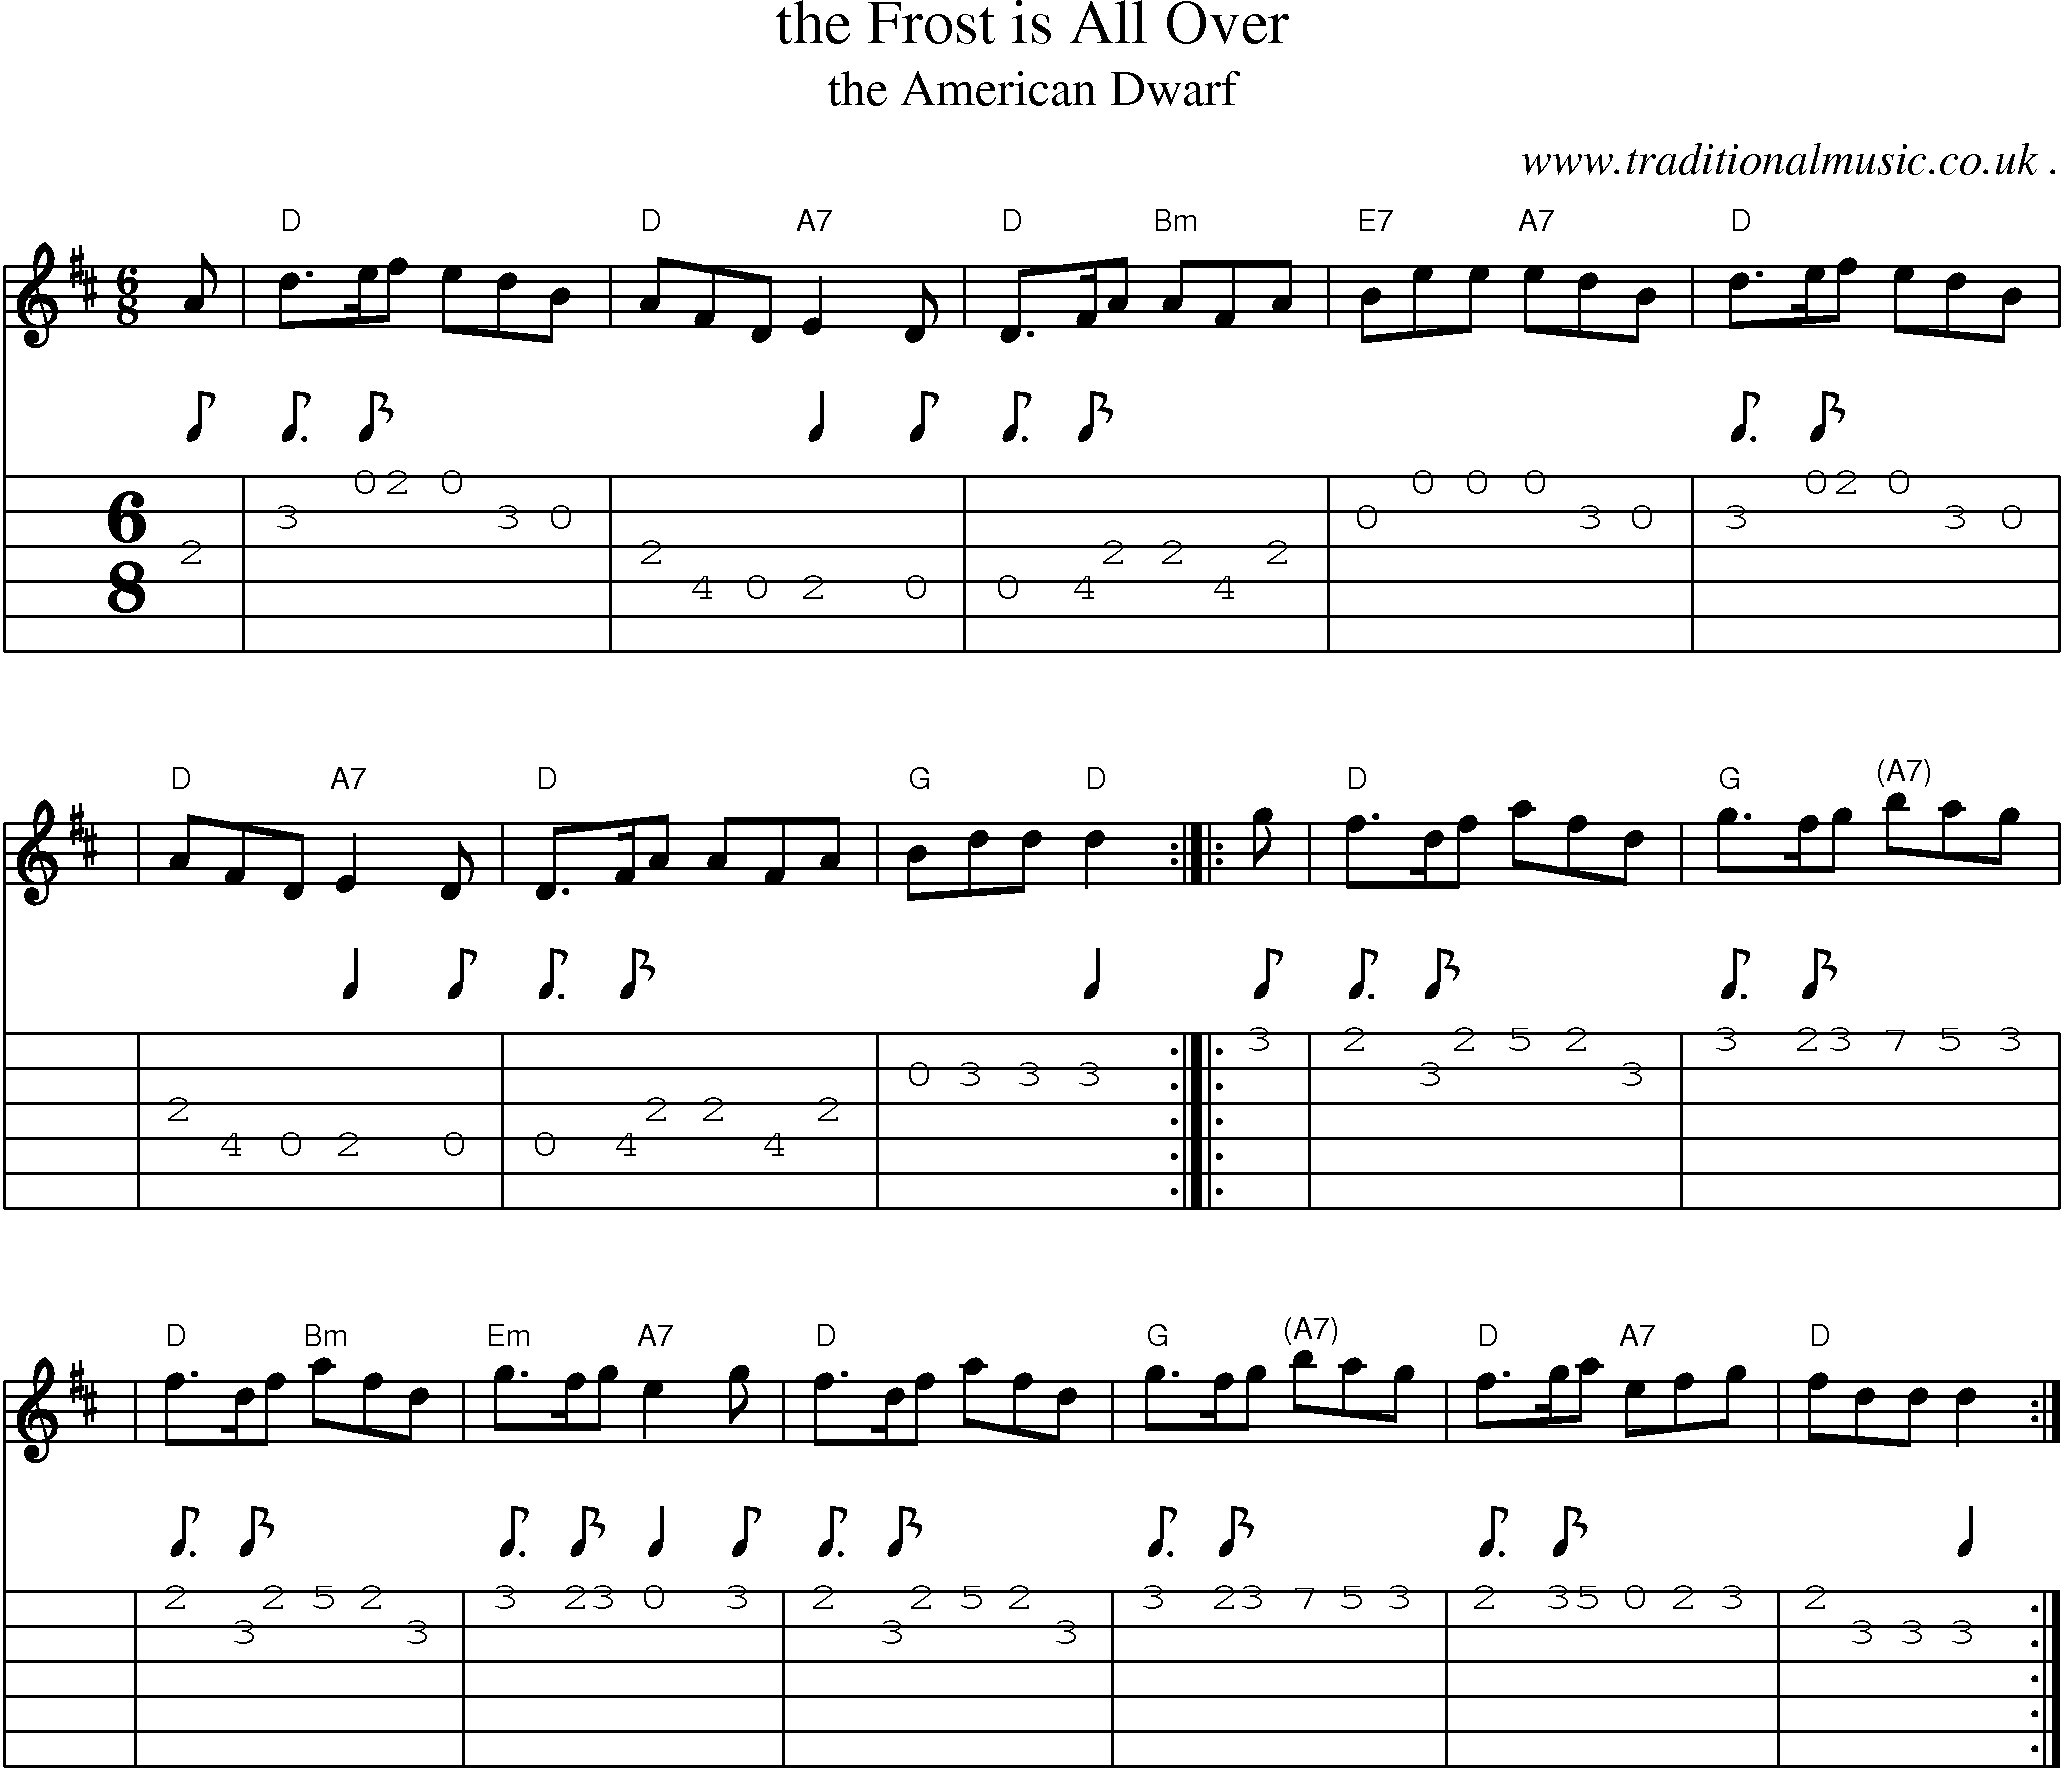 Sheet-music  score, Chords and Guitar Tabs for The Frost Is All Over